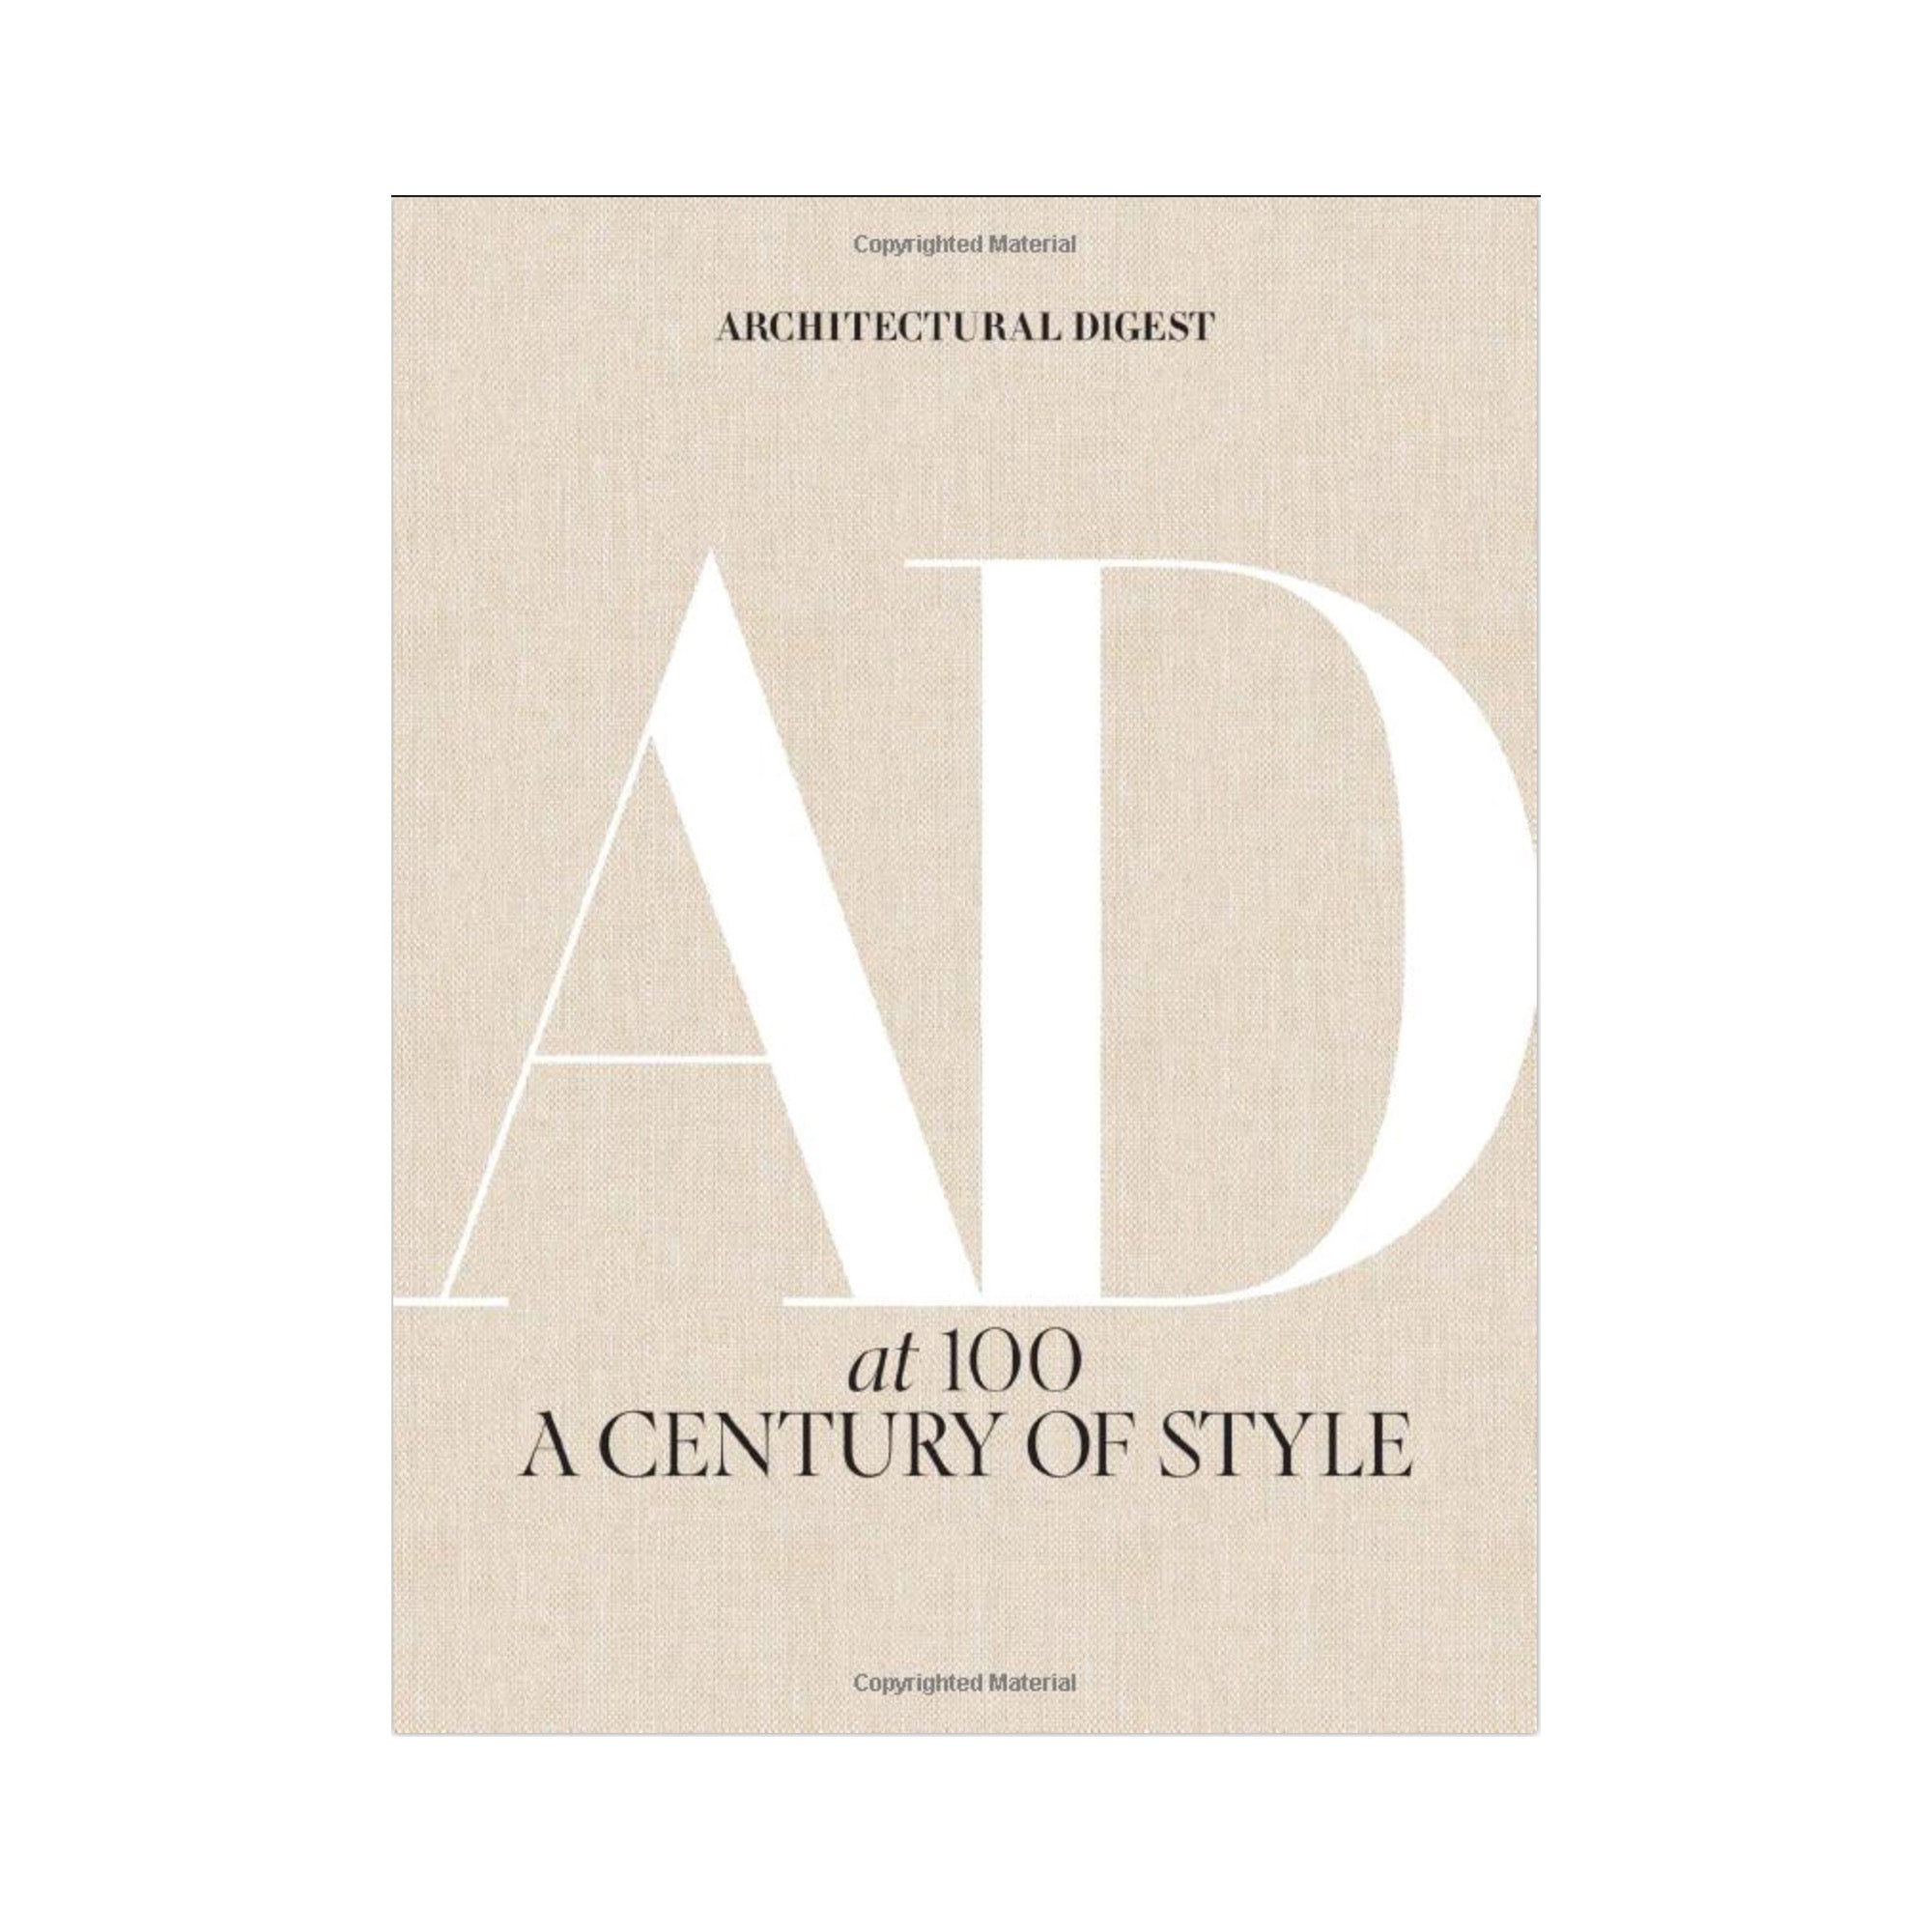 Architectural Digest at 100: A Century of Style - Hardcover